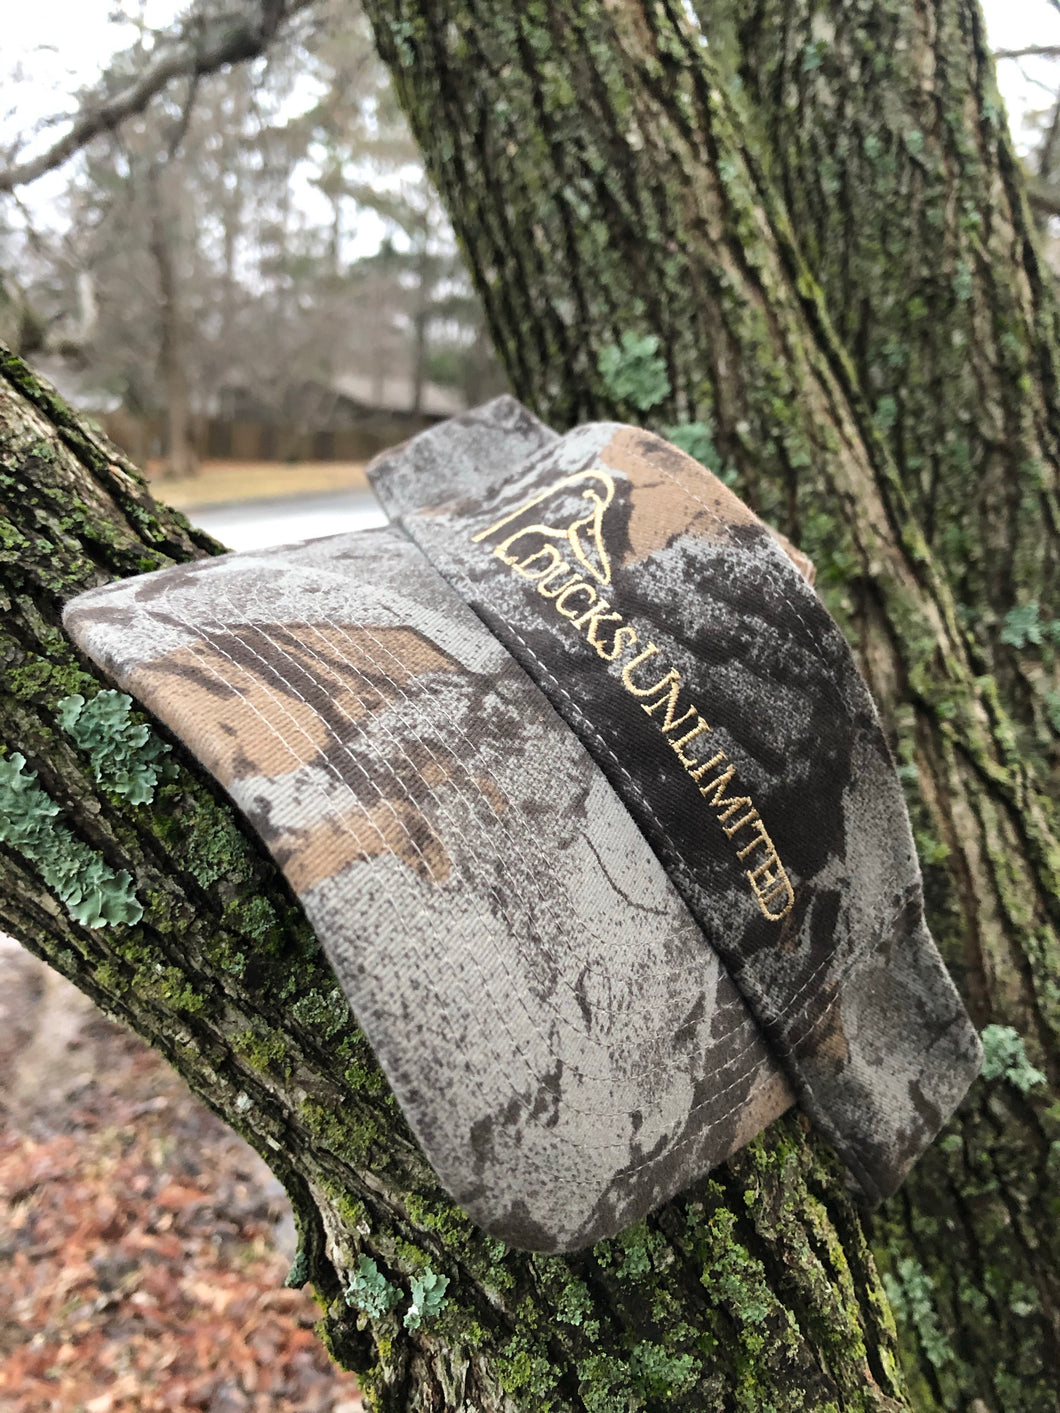 NEW Ducks Unlimited Natural Gear visor, tap to buy.